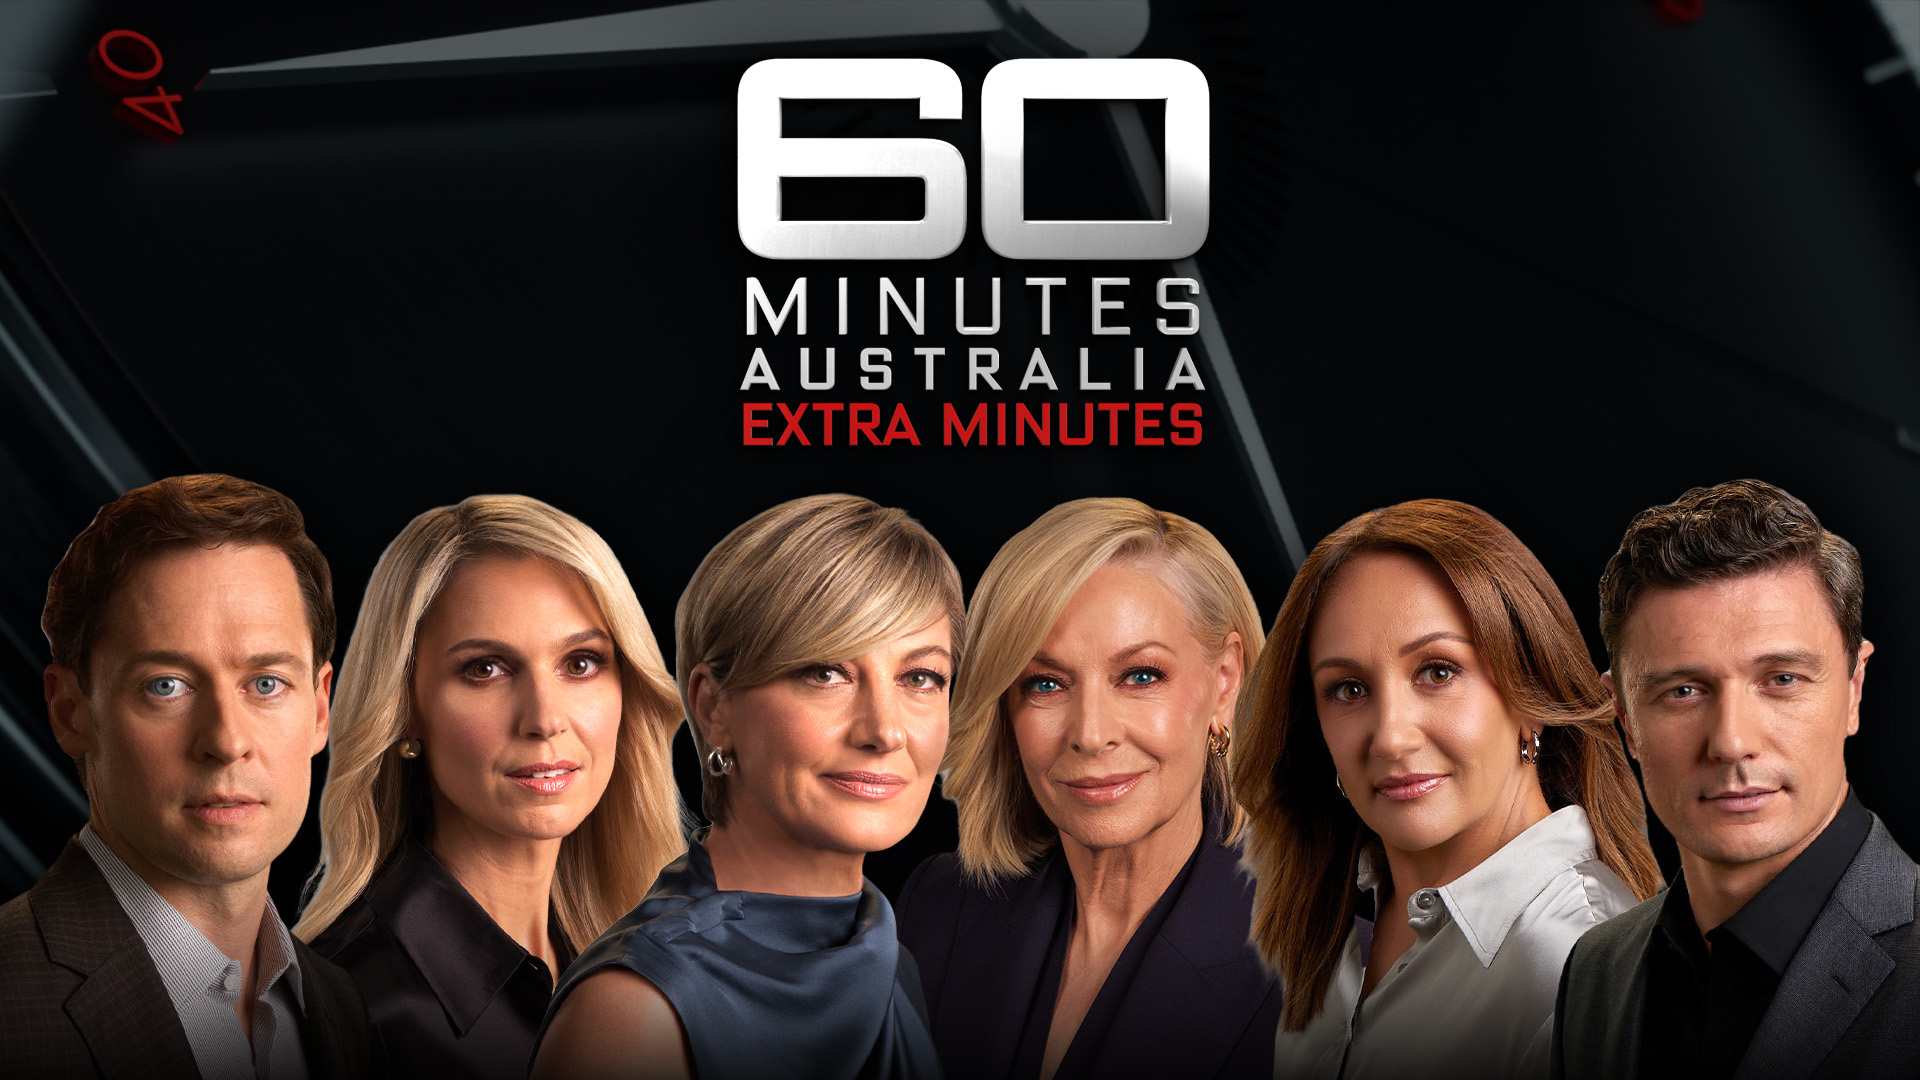 Introducing the new podcast from 60 Minutes